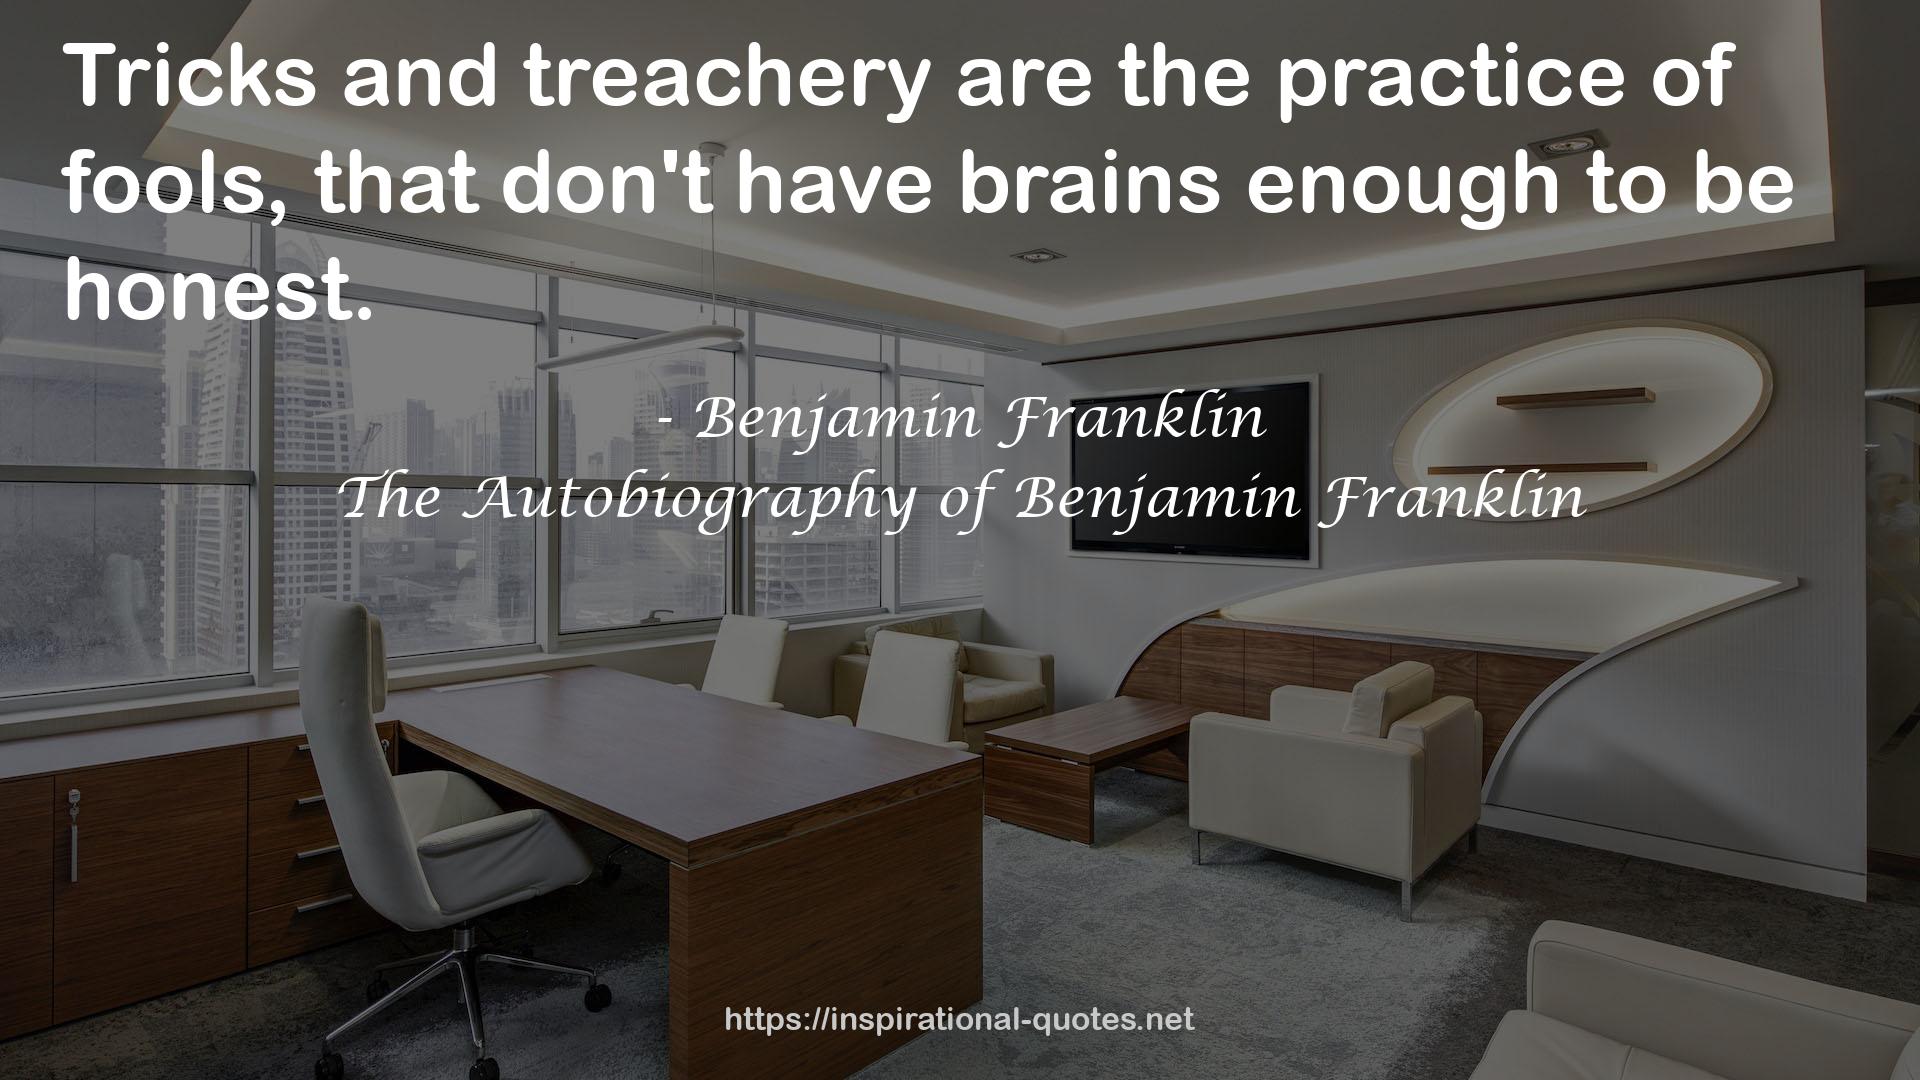 The Autobiography of Benjamin Franklin QUOTES